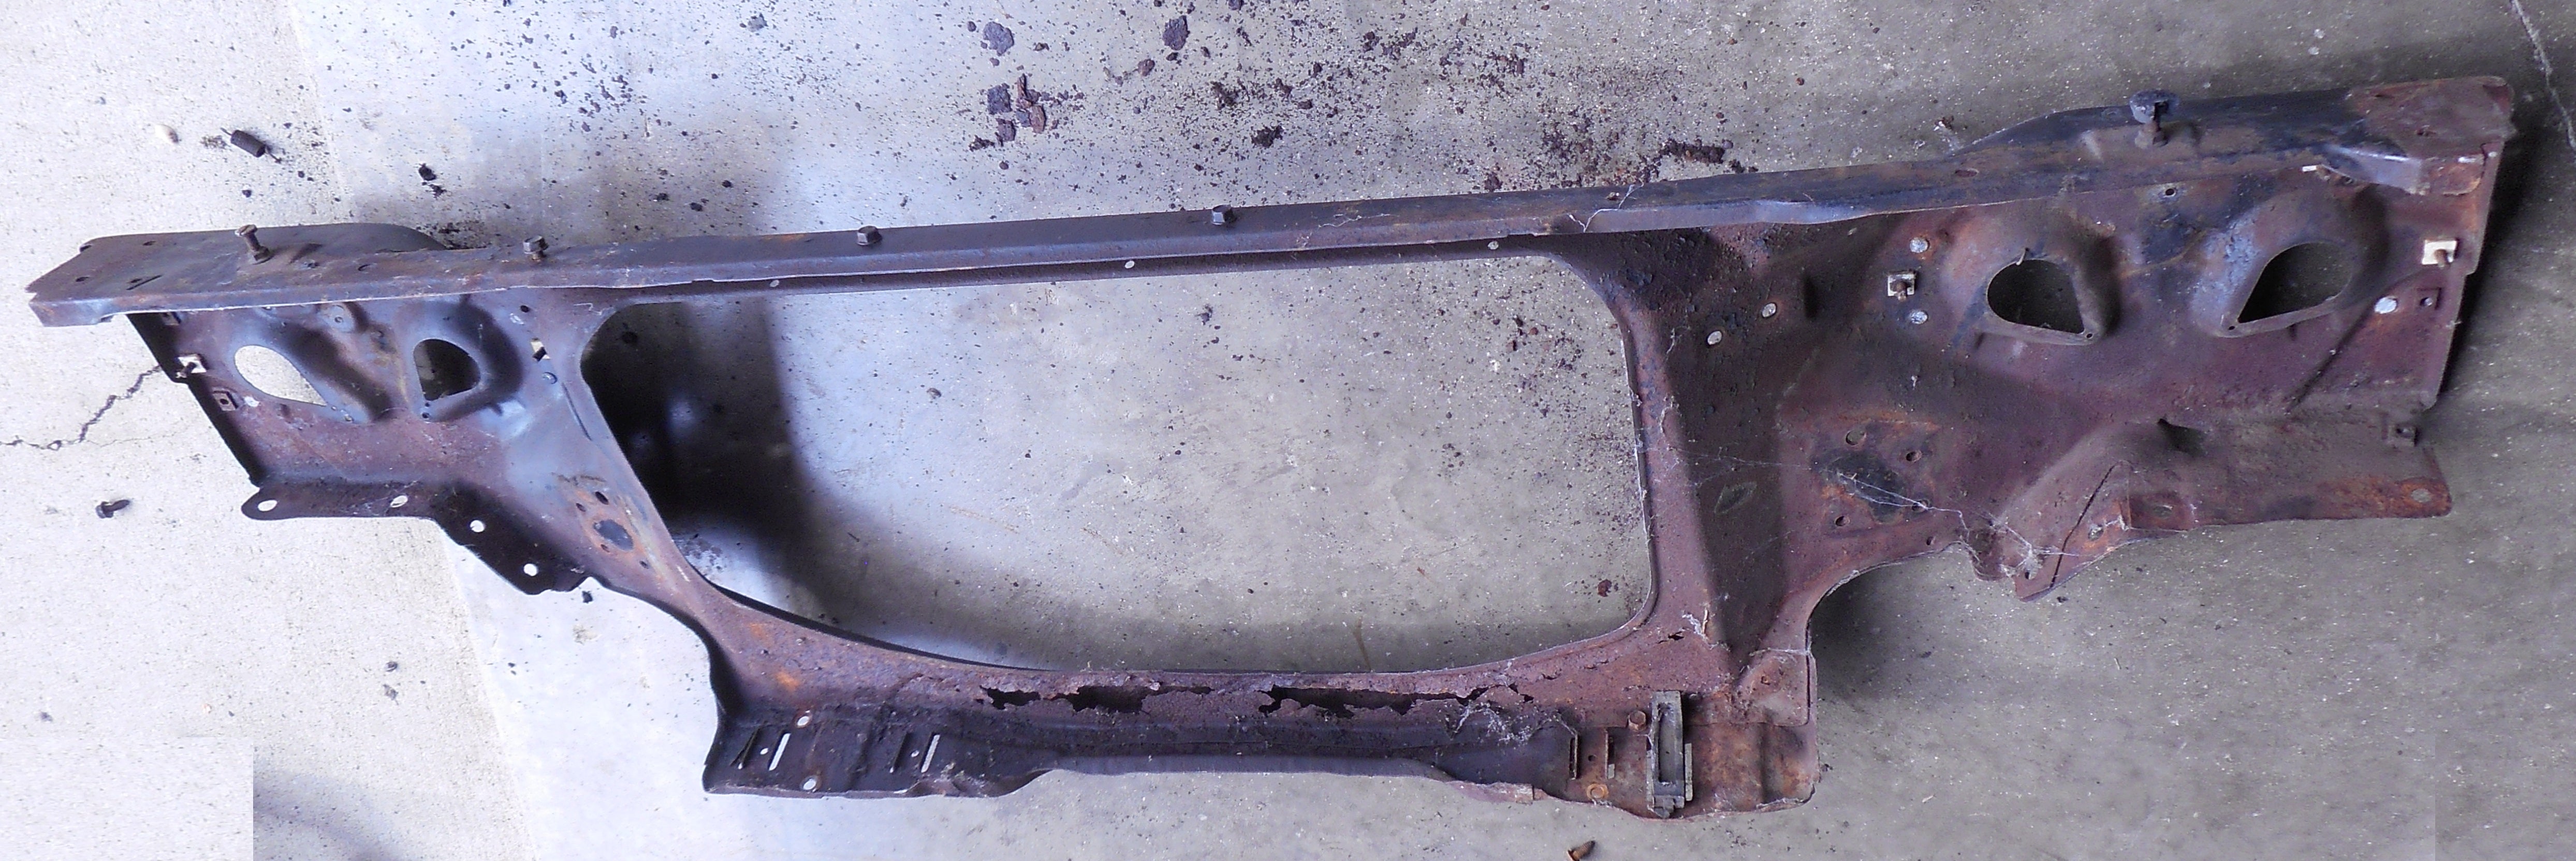 RADIATOR SUPPORT ,USED 71 IMPALA CAPRICE – Chicago Muscle Car